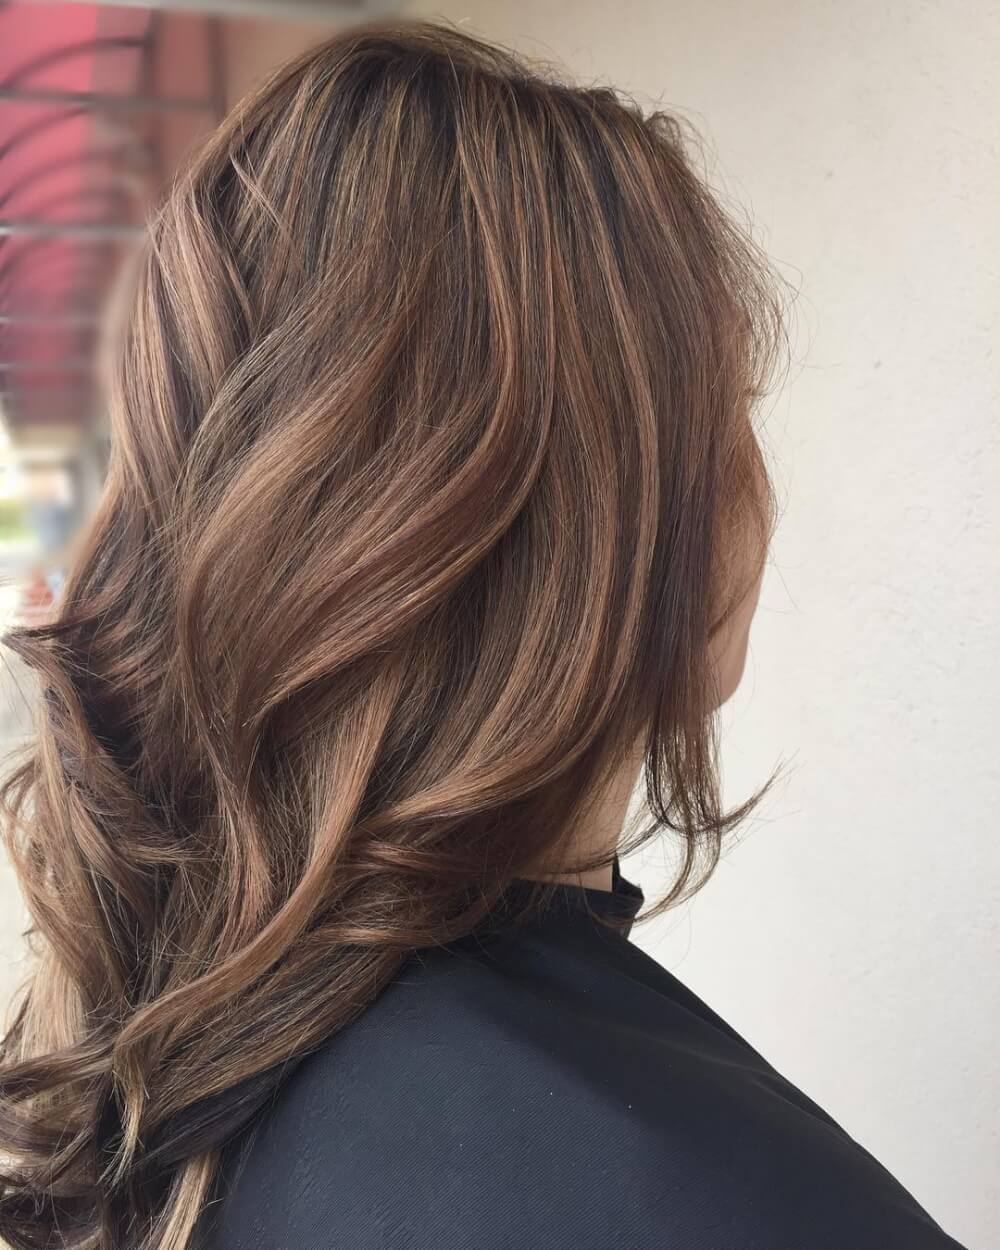 70 Incredible Light Brown Hair Color Ideas You Won't Regret Getting